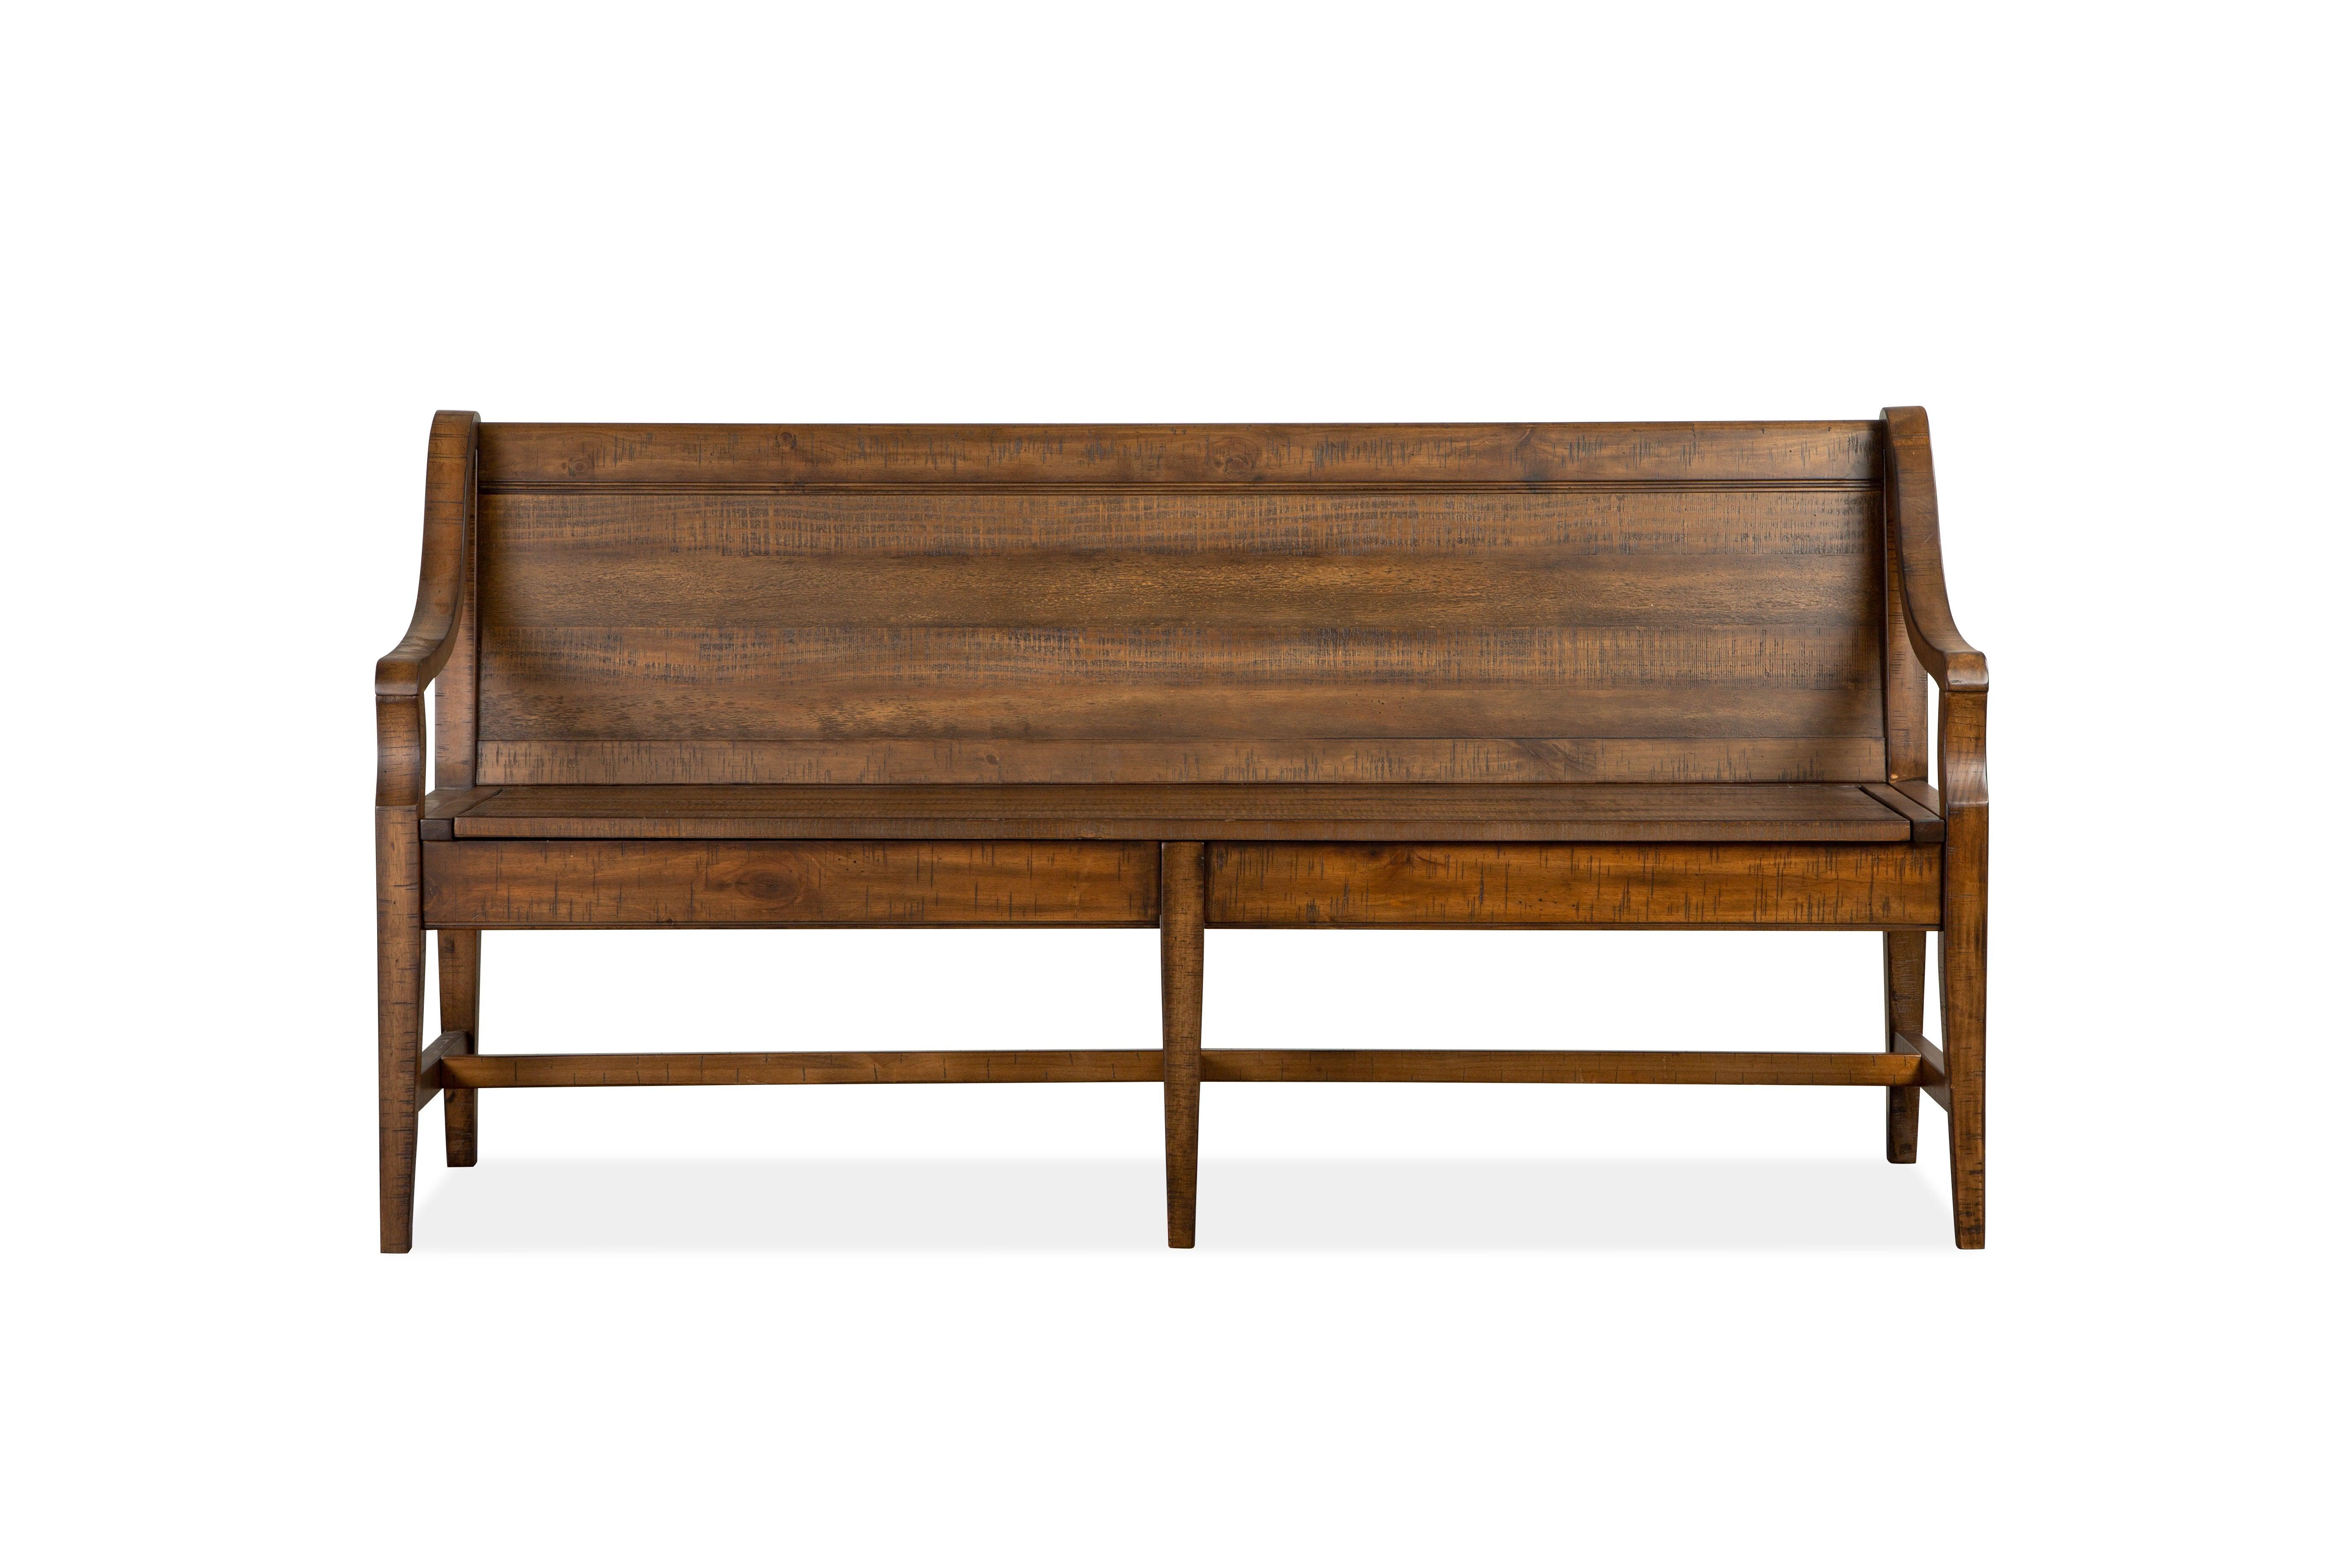 Magnussen Furniture - Bay Creek - Bench With Back - Toasted Nutmeg - 5th Avenue Furniture